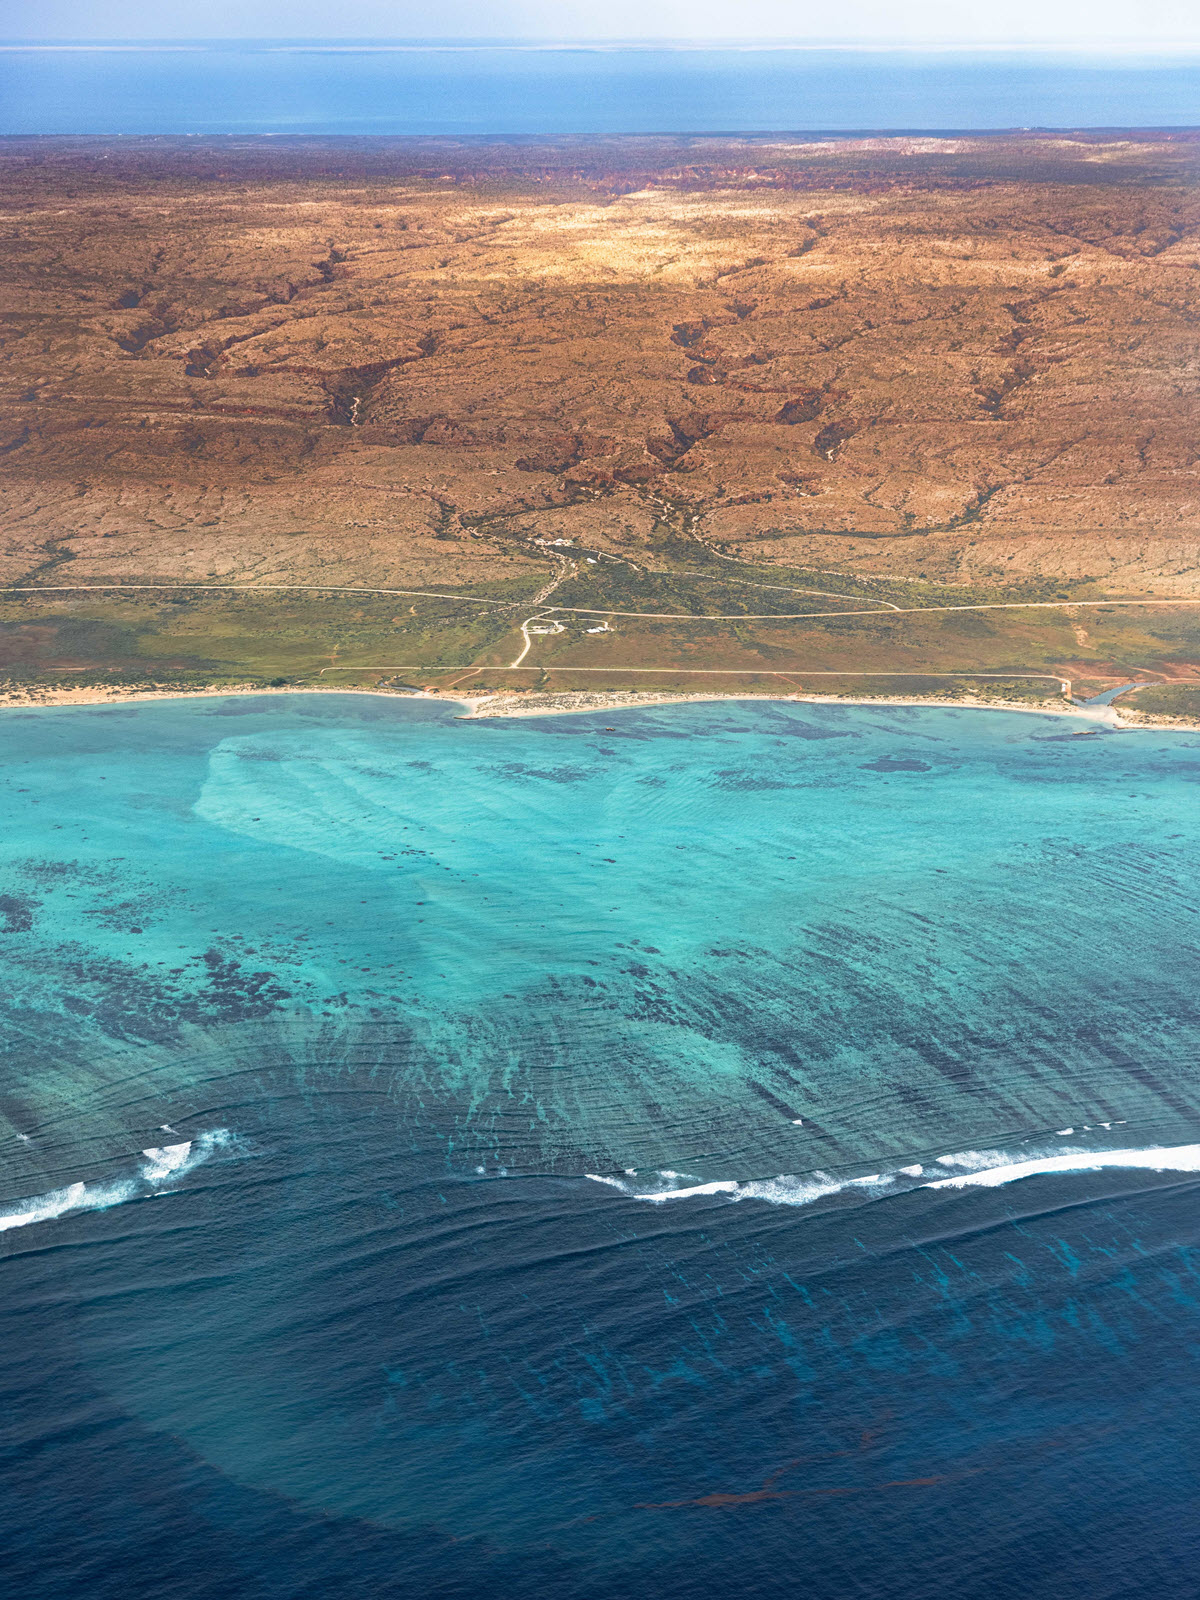 Amazing aerial views over Ningaloo Reef in Exmouth.